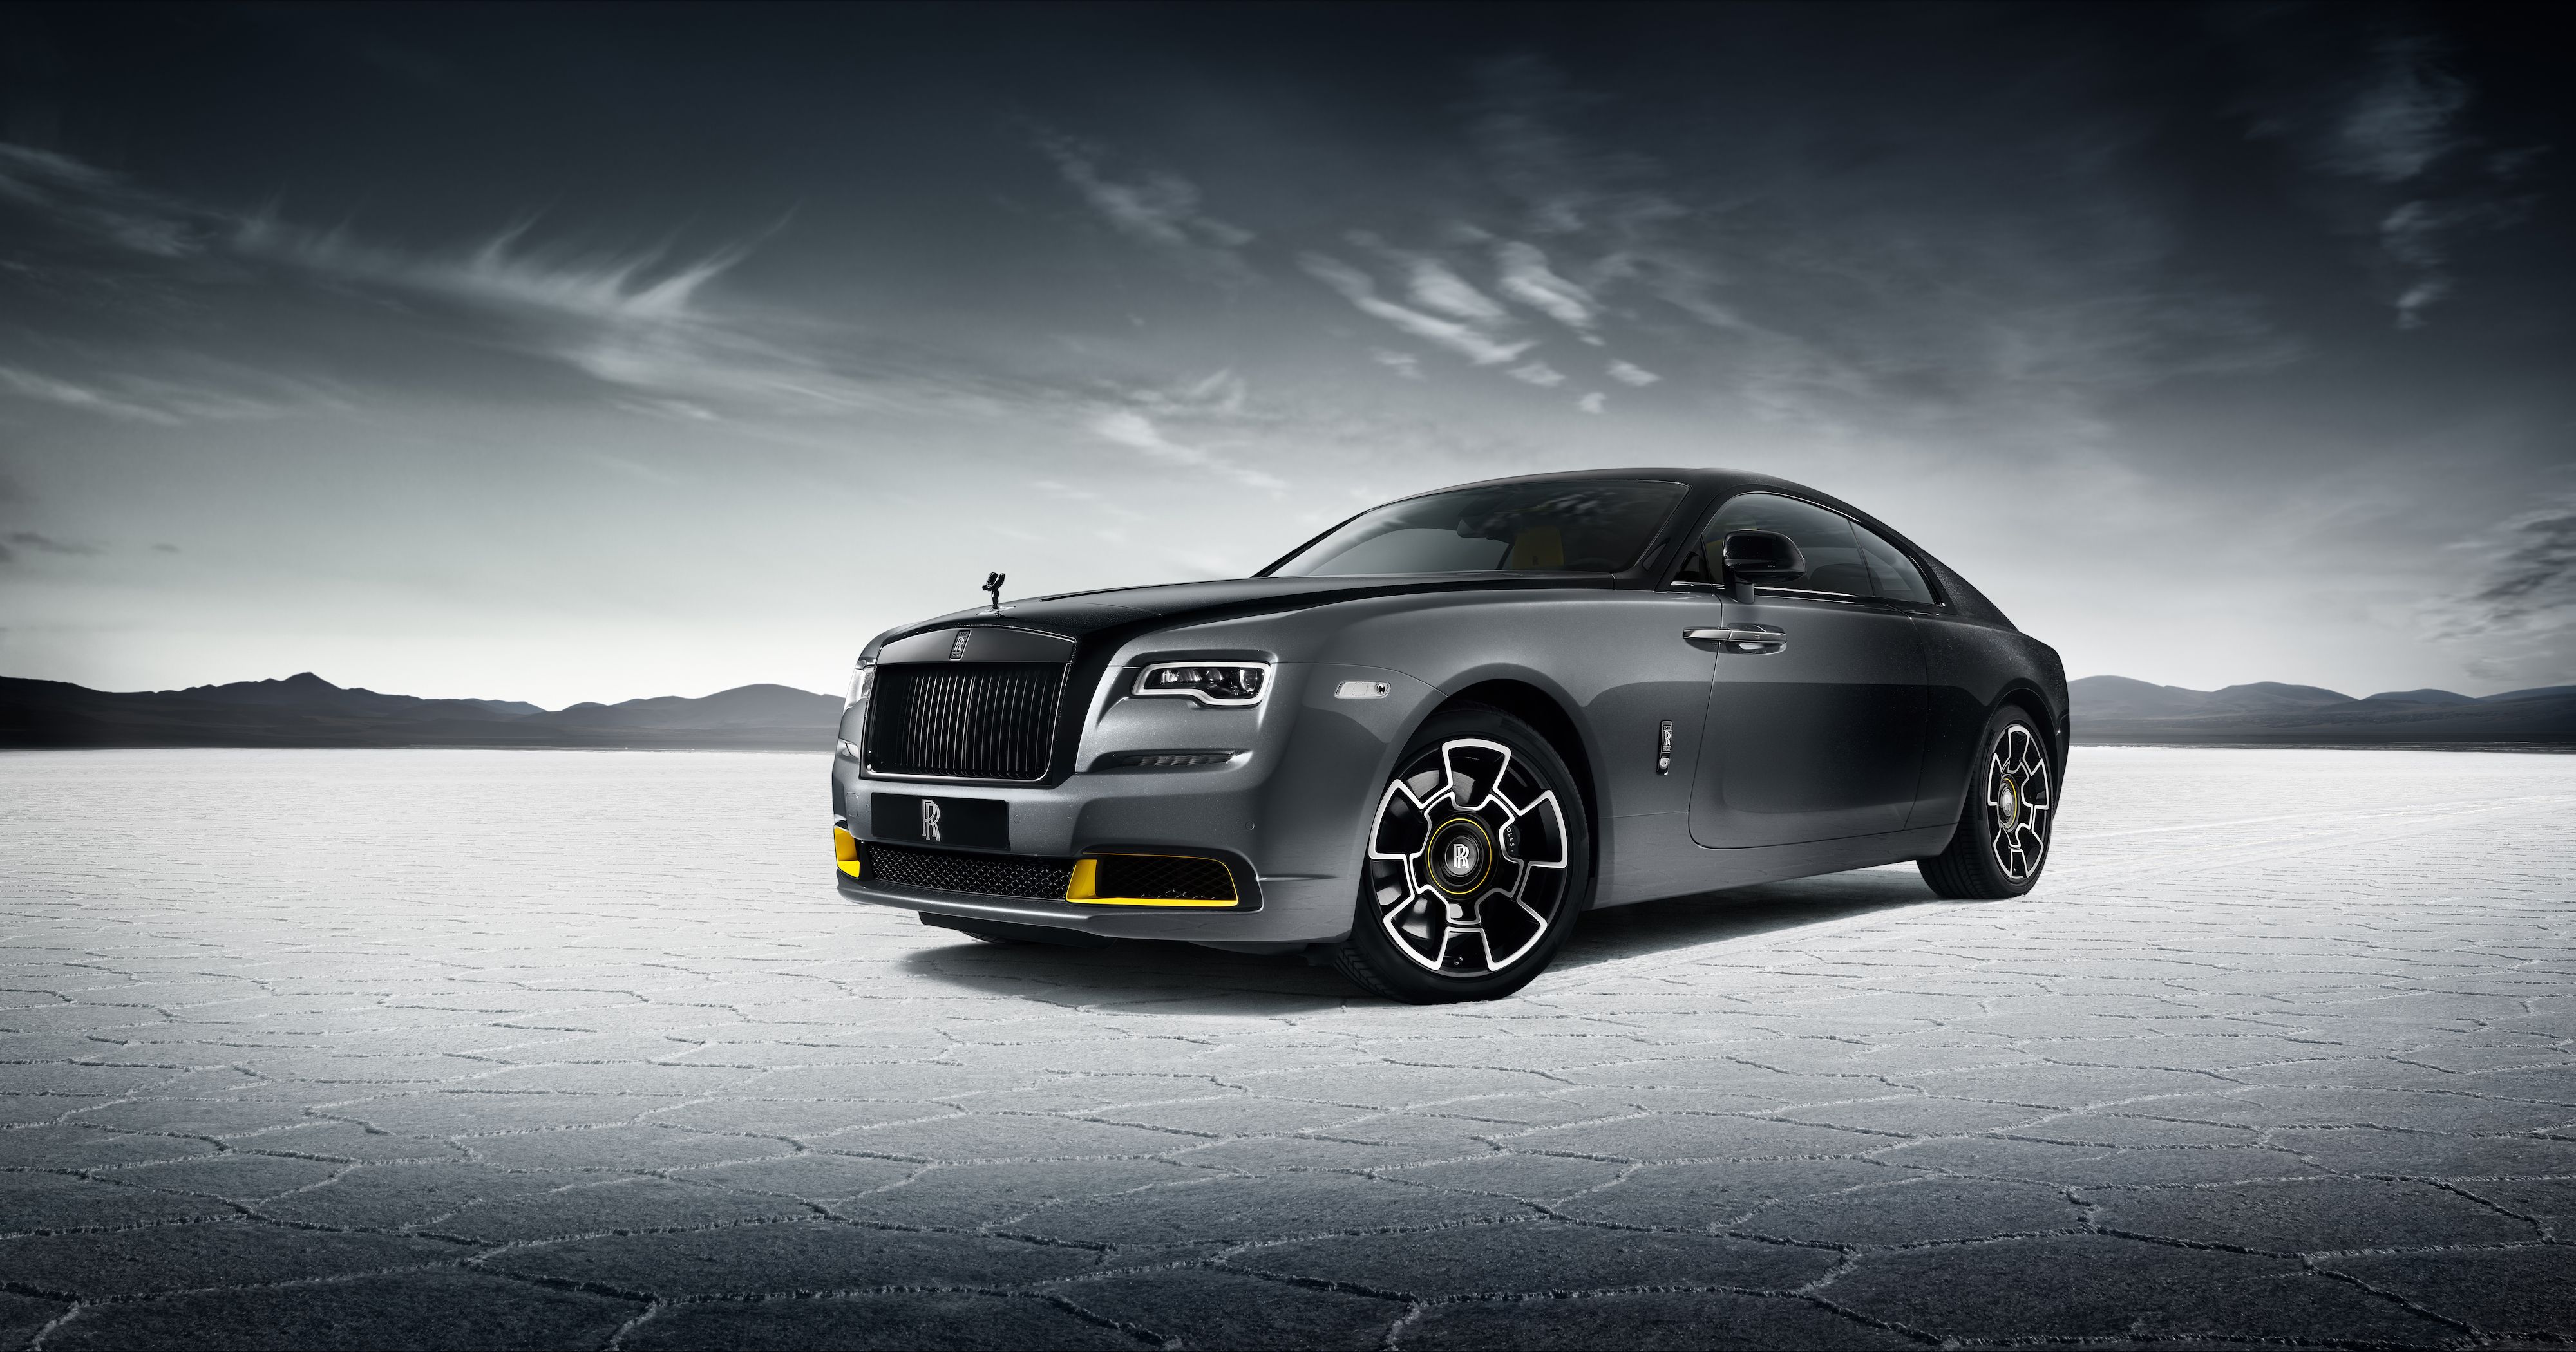 The 10 Cheapest Rolls Royce Car Models Money Can Buy